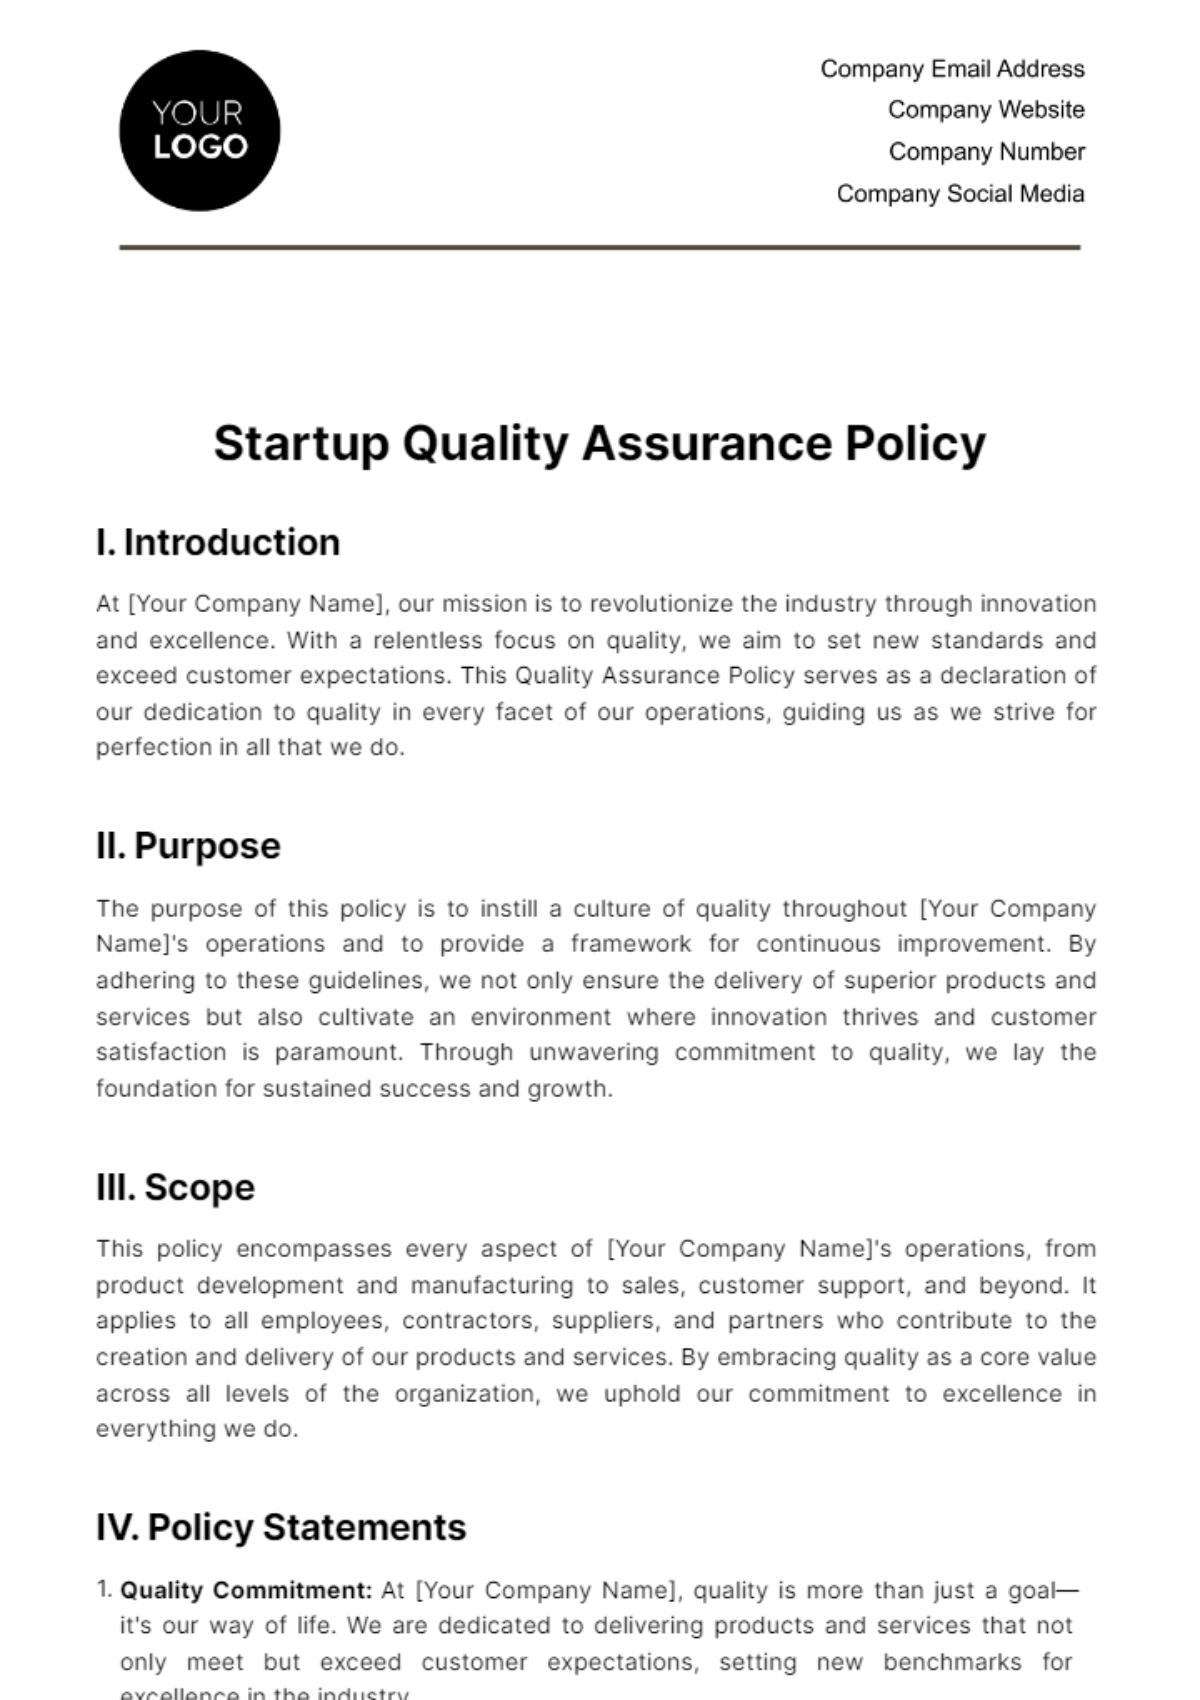 Free Startup Quality Assurance Policy Template